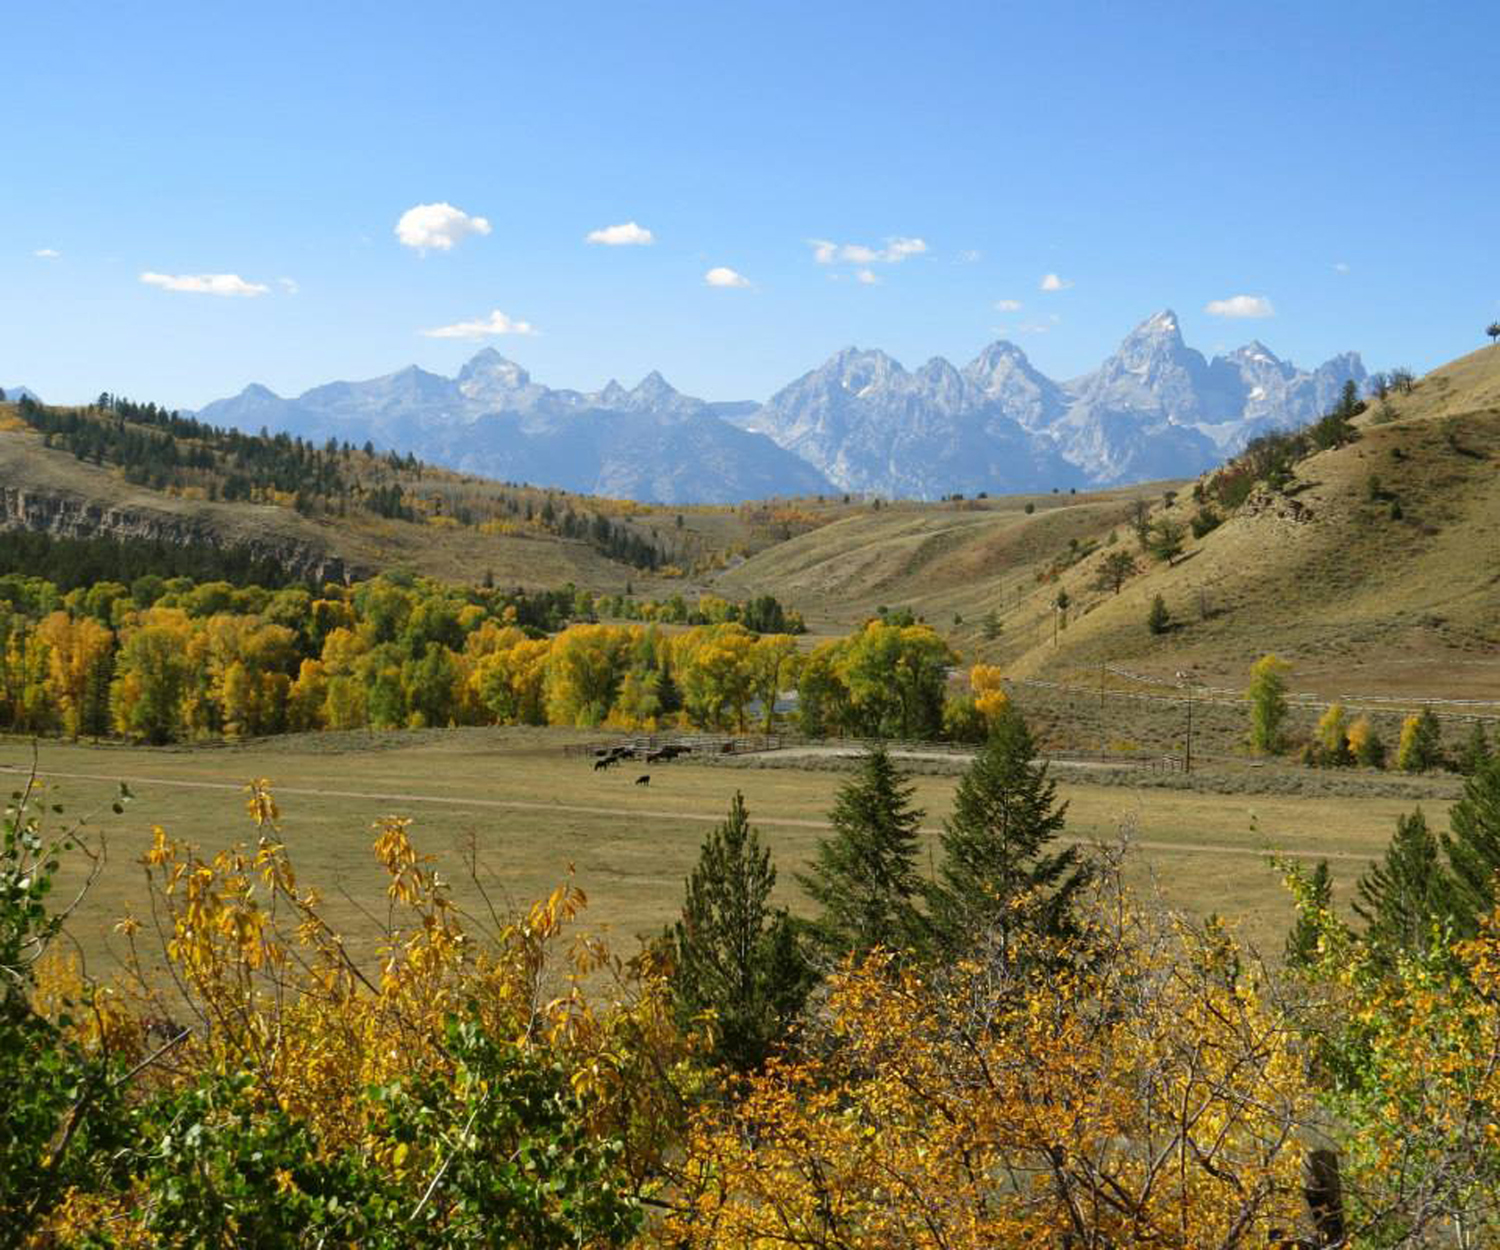 September is an ideal time to be in Jackson Hole as the Teton Range boasts colorful foliage, providing inspiration for festival artists and art lovers.